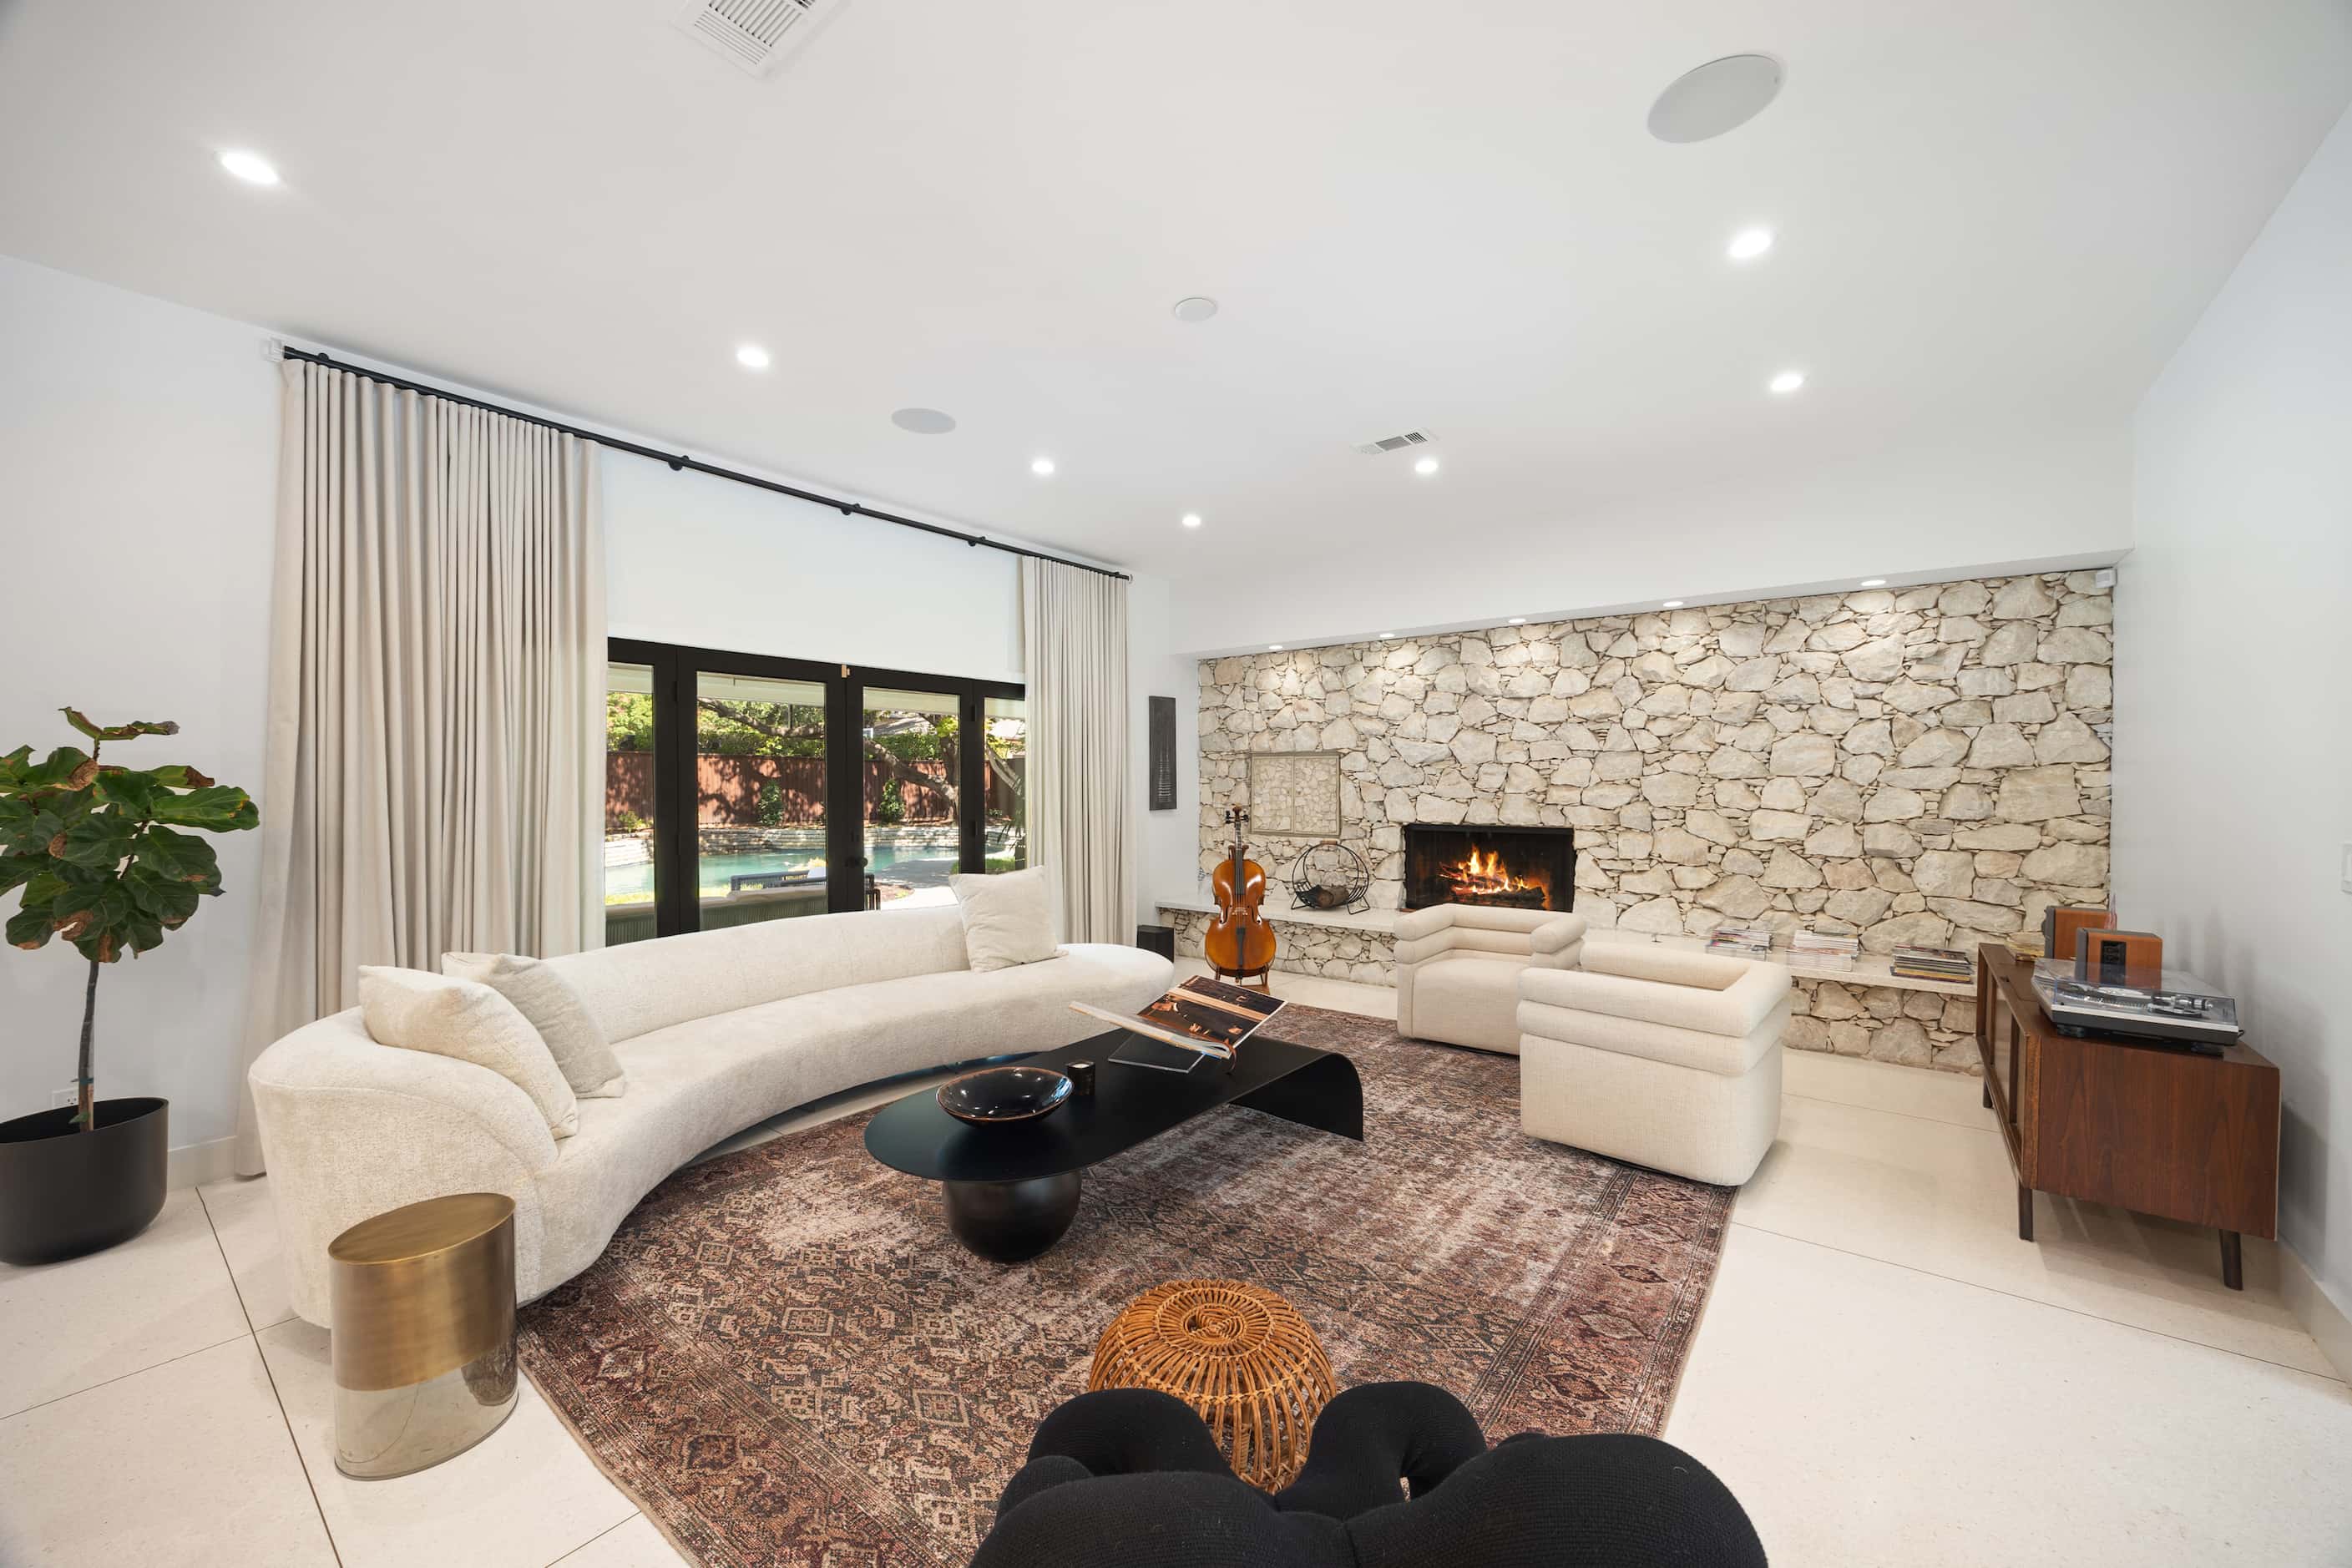 Living room in midcentury home with modern and contemporary furniture, original stone fireplace